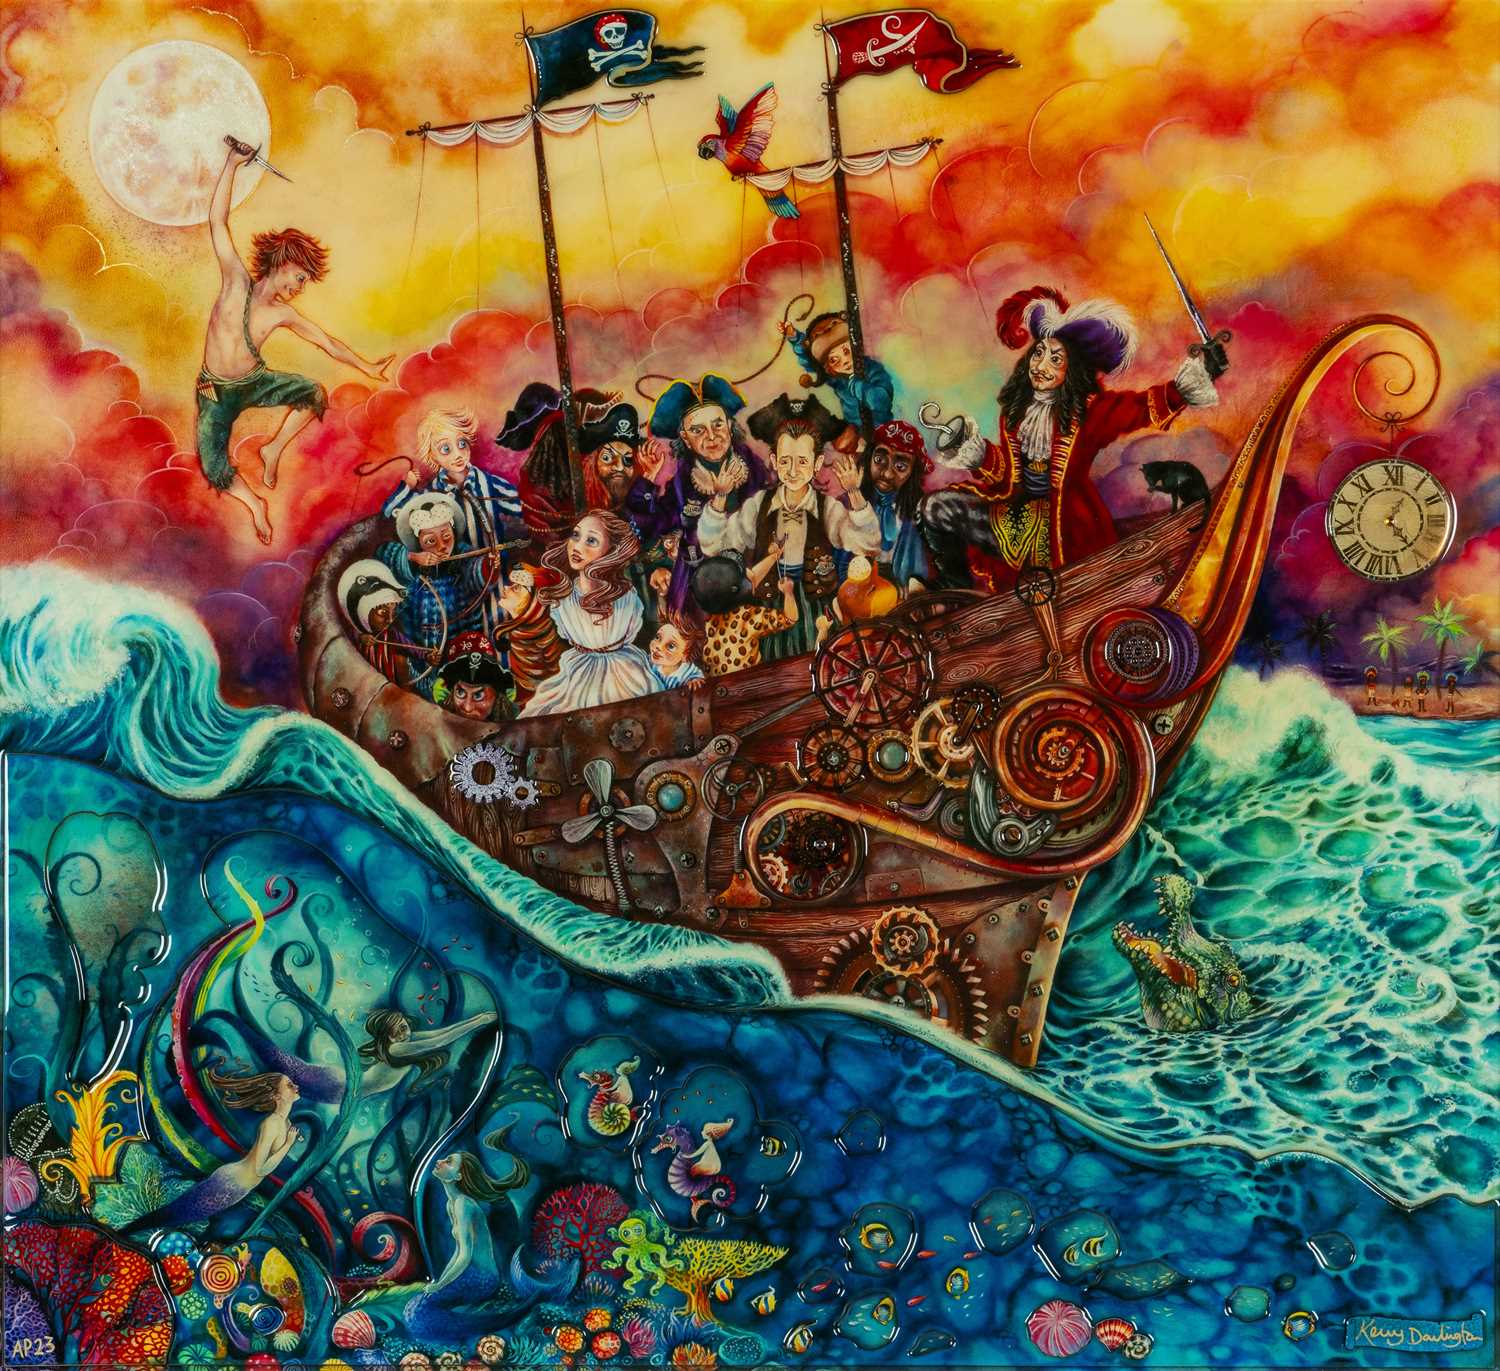 ‡ KERRY DARLINGTON limited edition (artists proof #23) unique resin print - entitled 'The Pirate